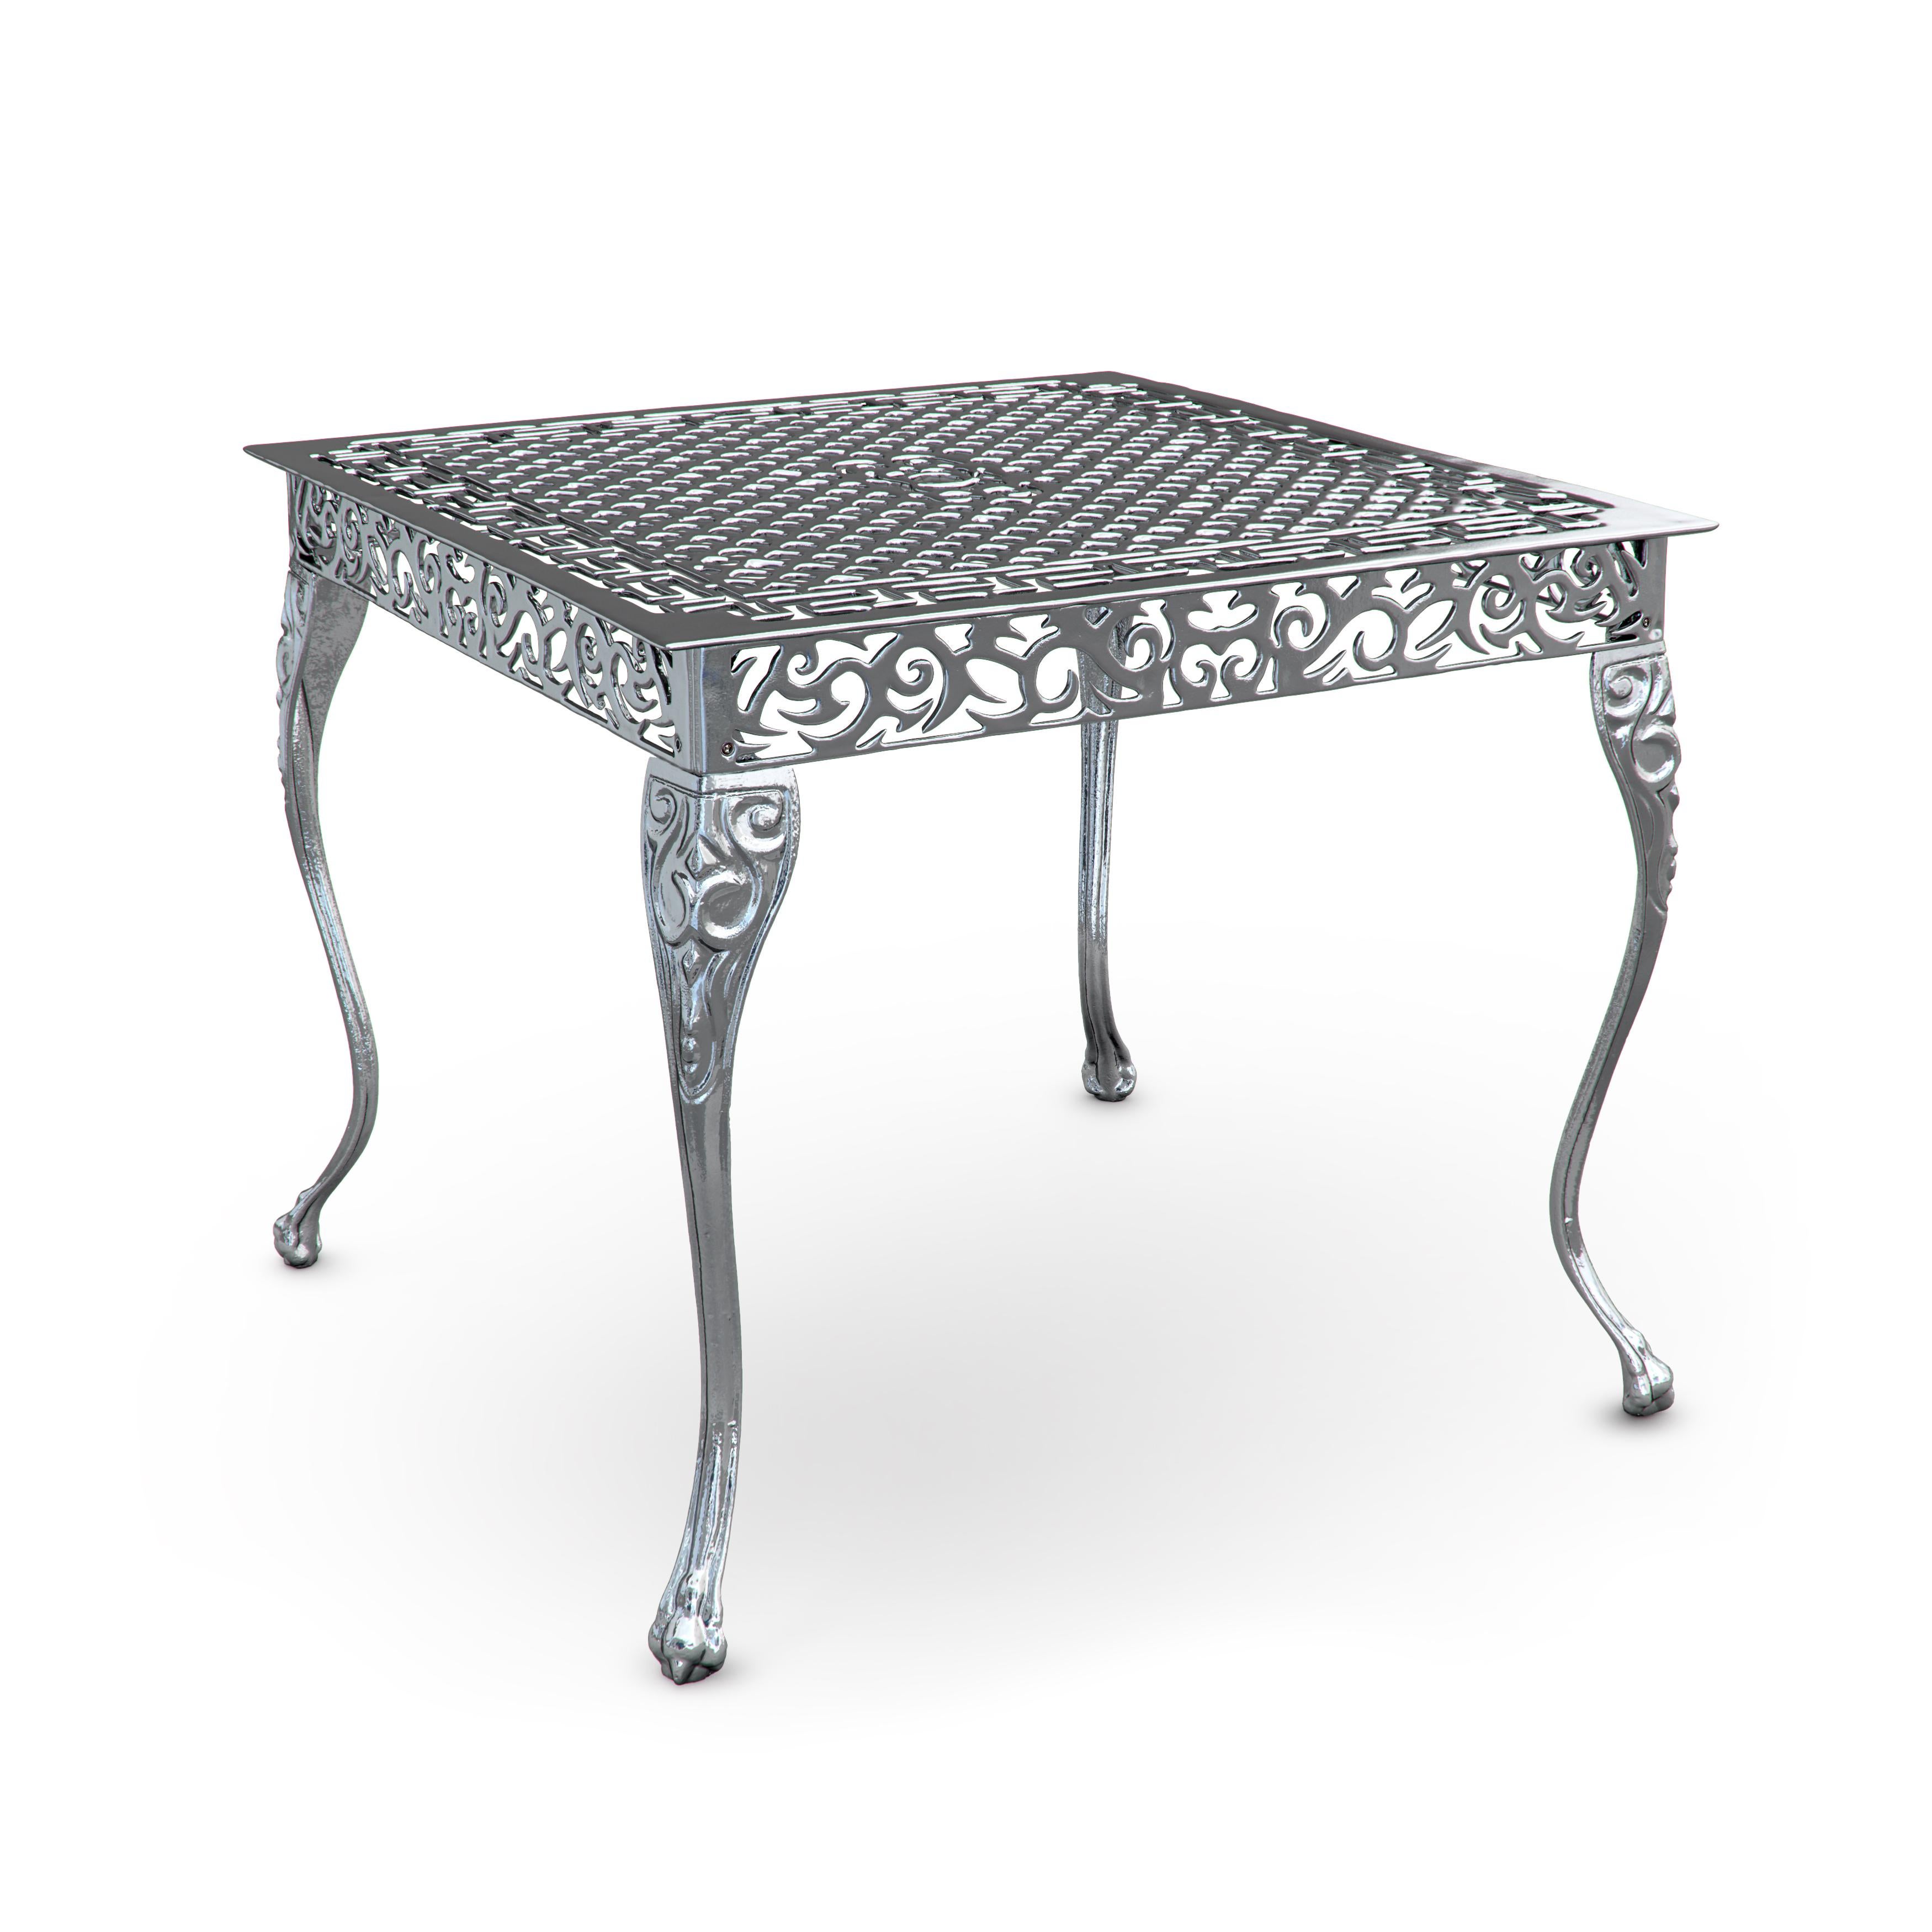 Italian Santi, Outdoor Aluminum Side Table with Chrome Finish, Made in Italy For Sale